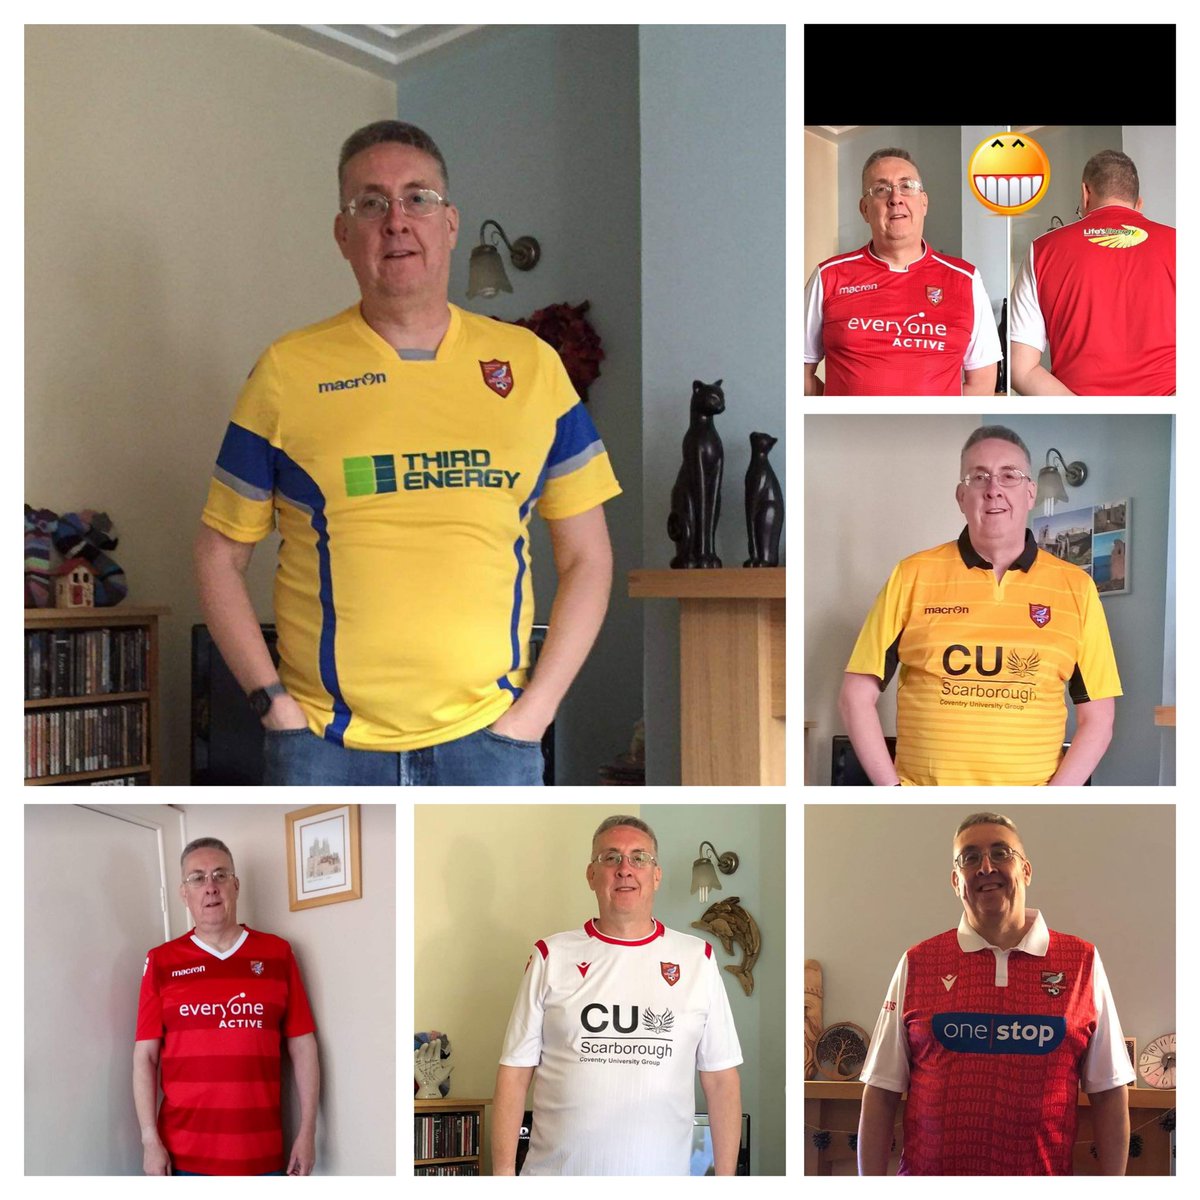 Some of @safc shirts from last few seasons #seadogs